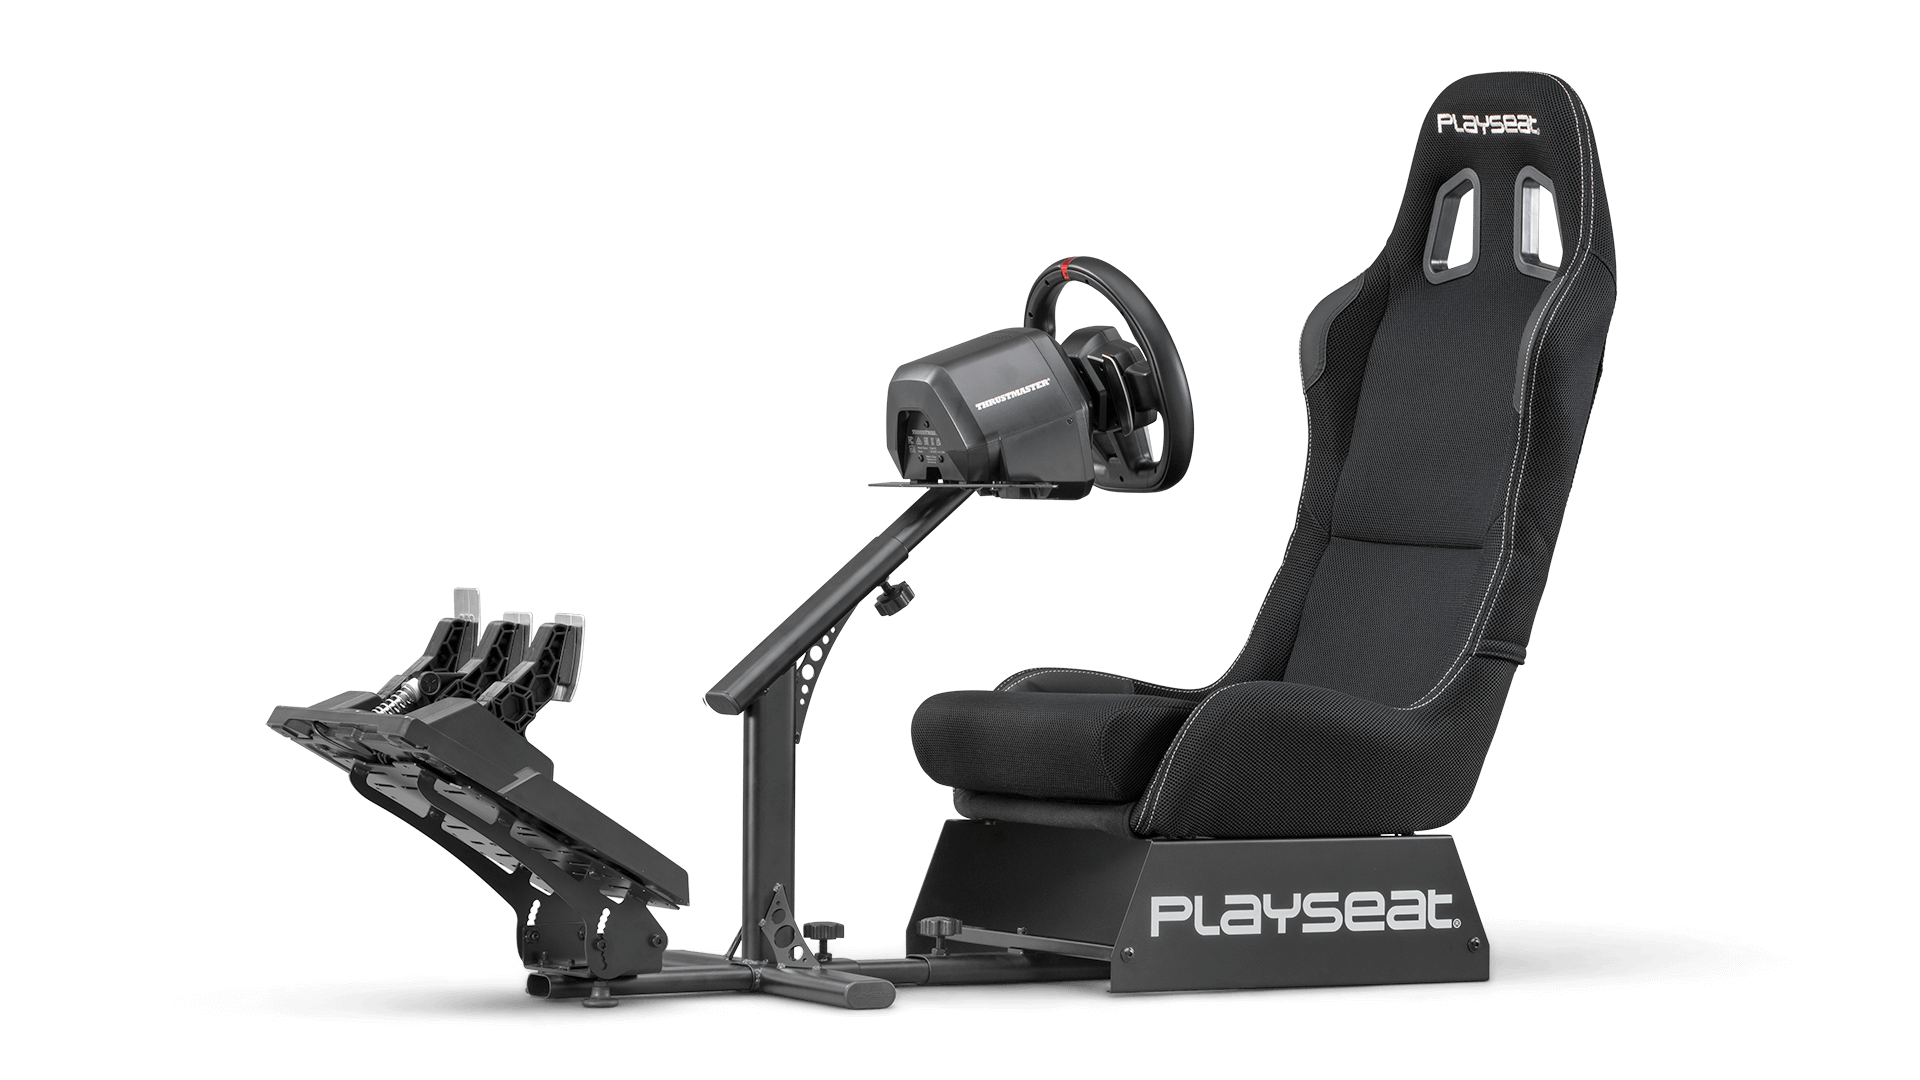 playseat-evolution-black-actifit-racing-simulator-front-angle-view-thrustmaster-1920x1080.png